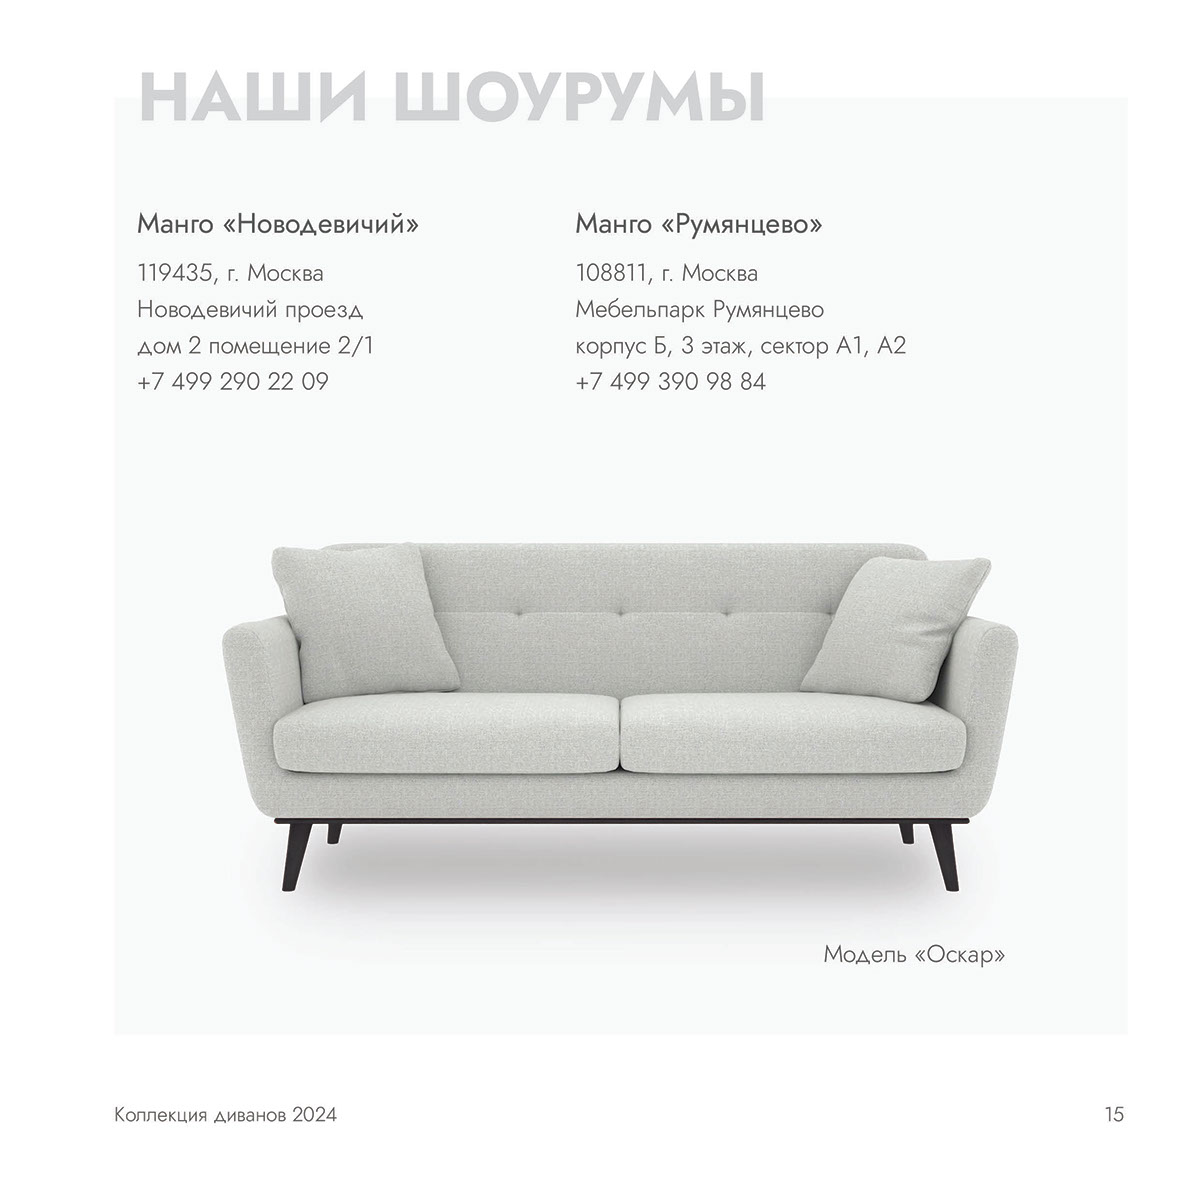 Couch catalogue rendition image